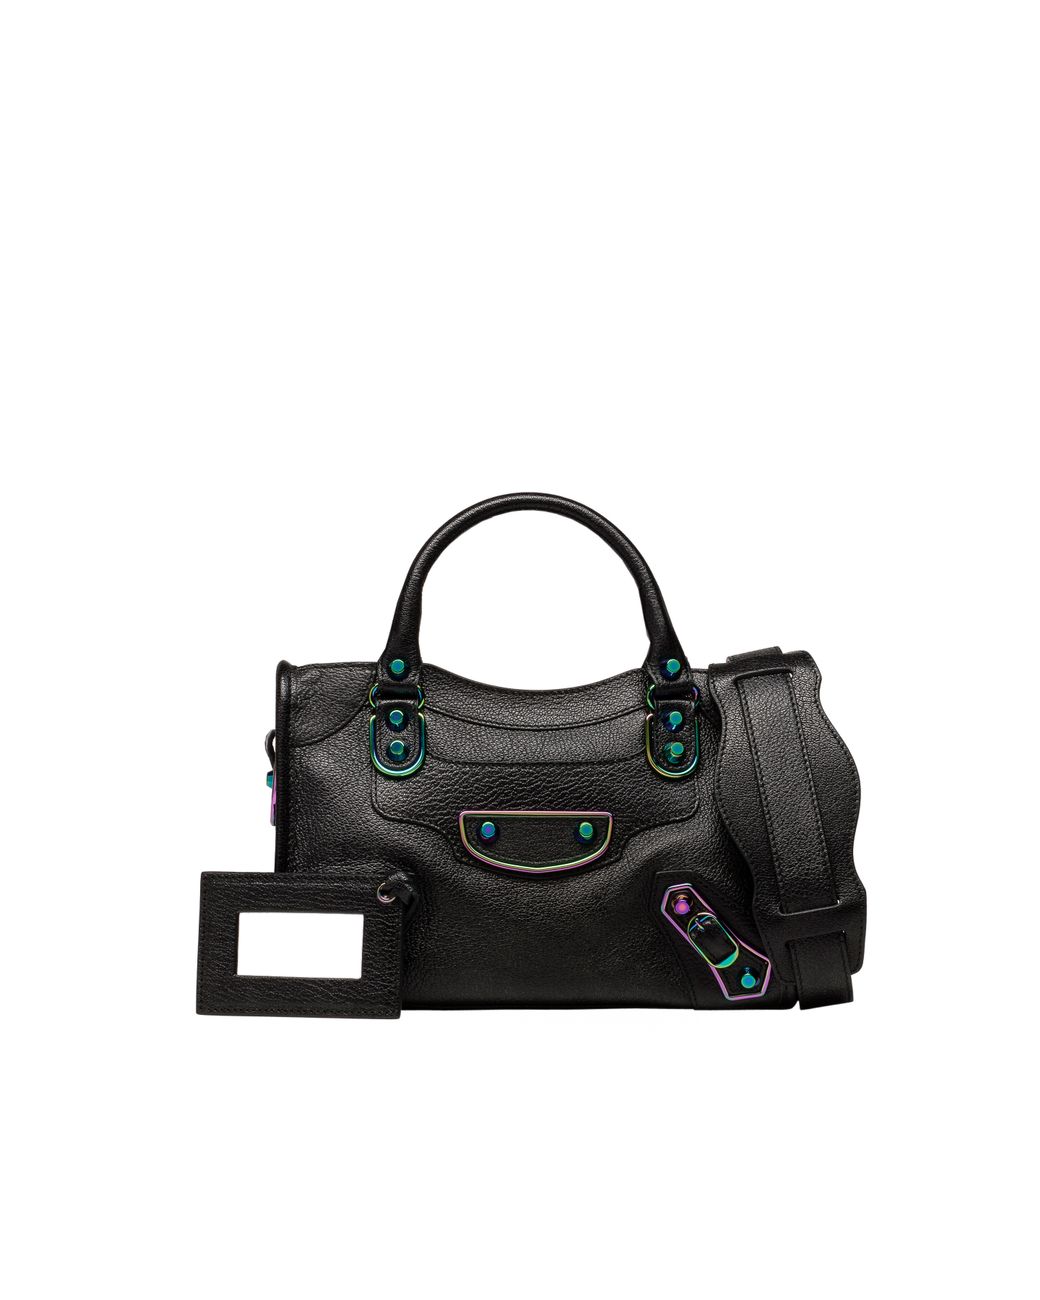 Balenciaga Iridescent Hardware For City Bags  Spotted Fashion